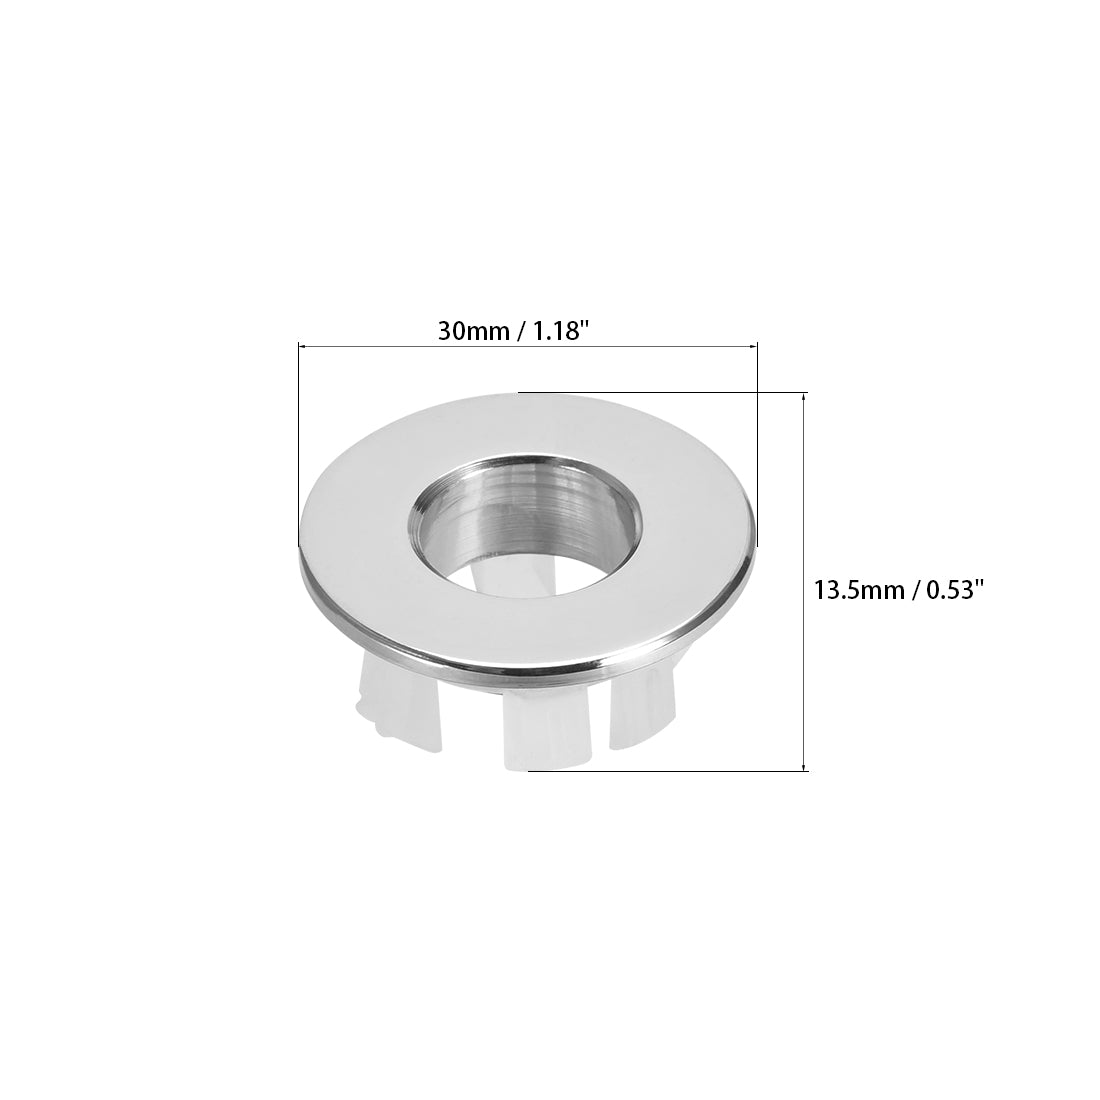 uxcell Uxcell Sink Basin Trim Overflow Cover Copper Insert in Hole Round Caps 3Pcs